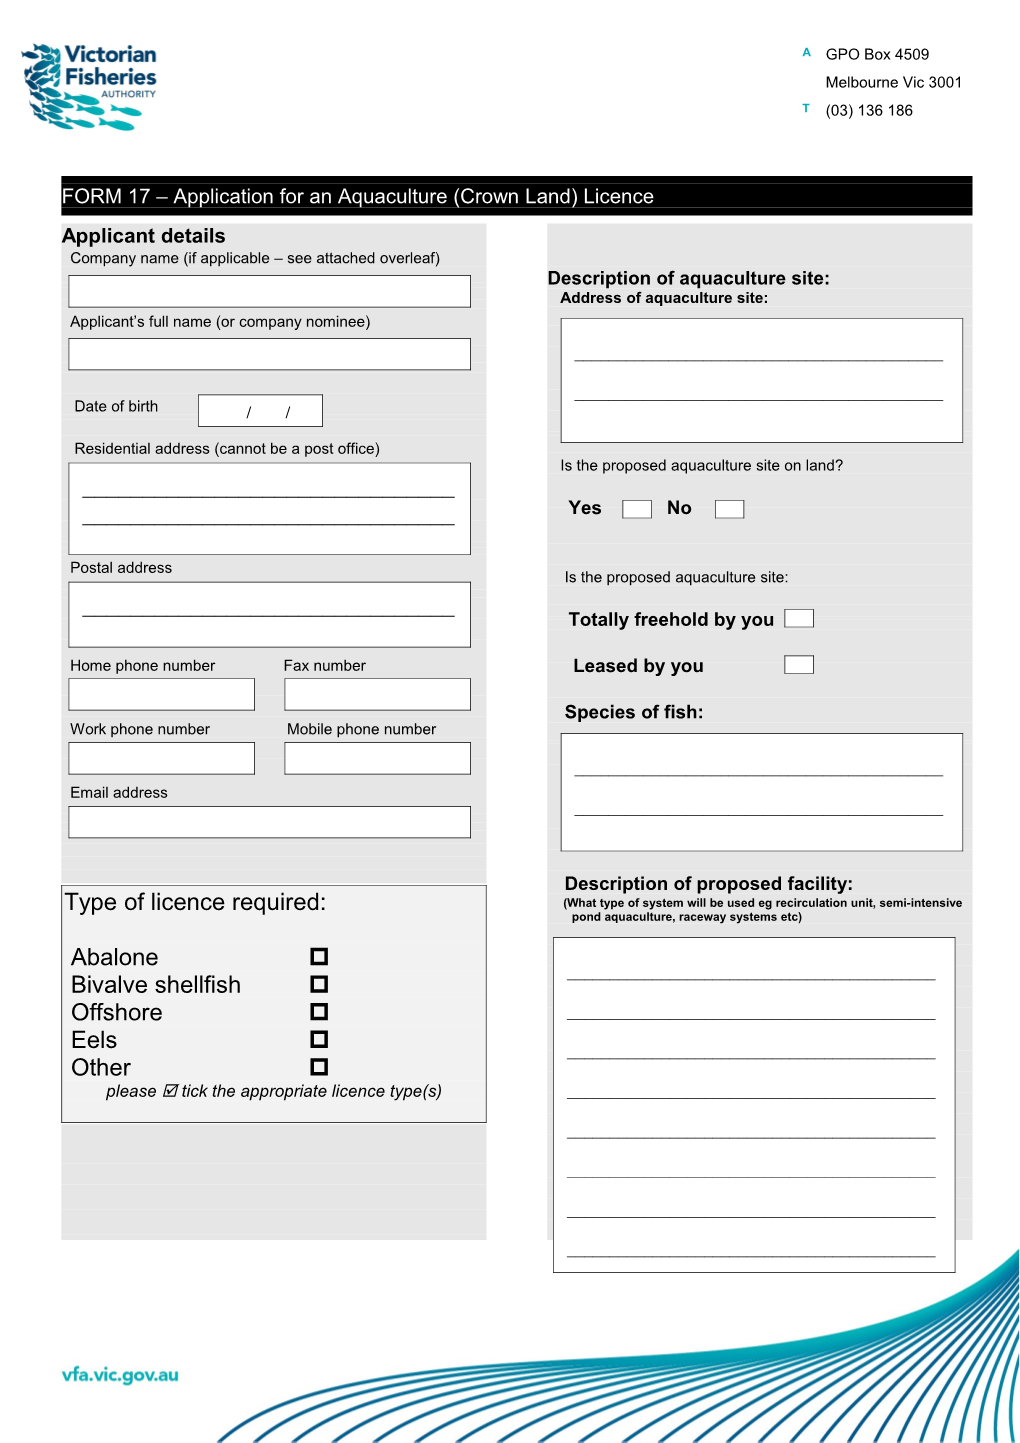 FORM 17 Application for an Aquaculture (Crownland) Licence